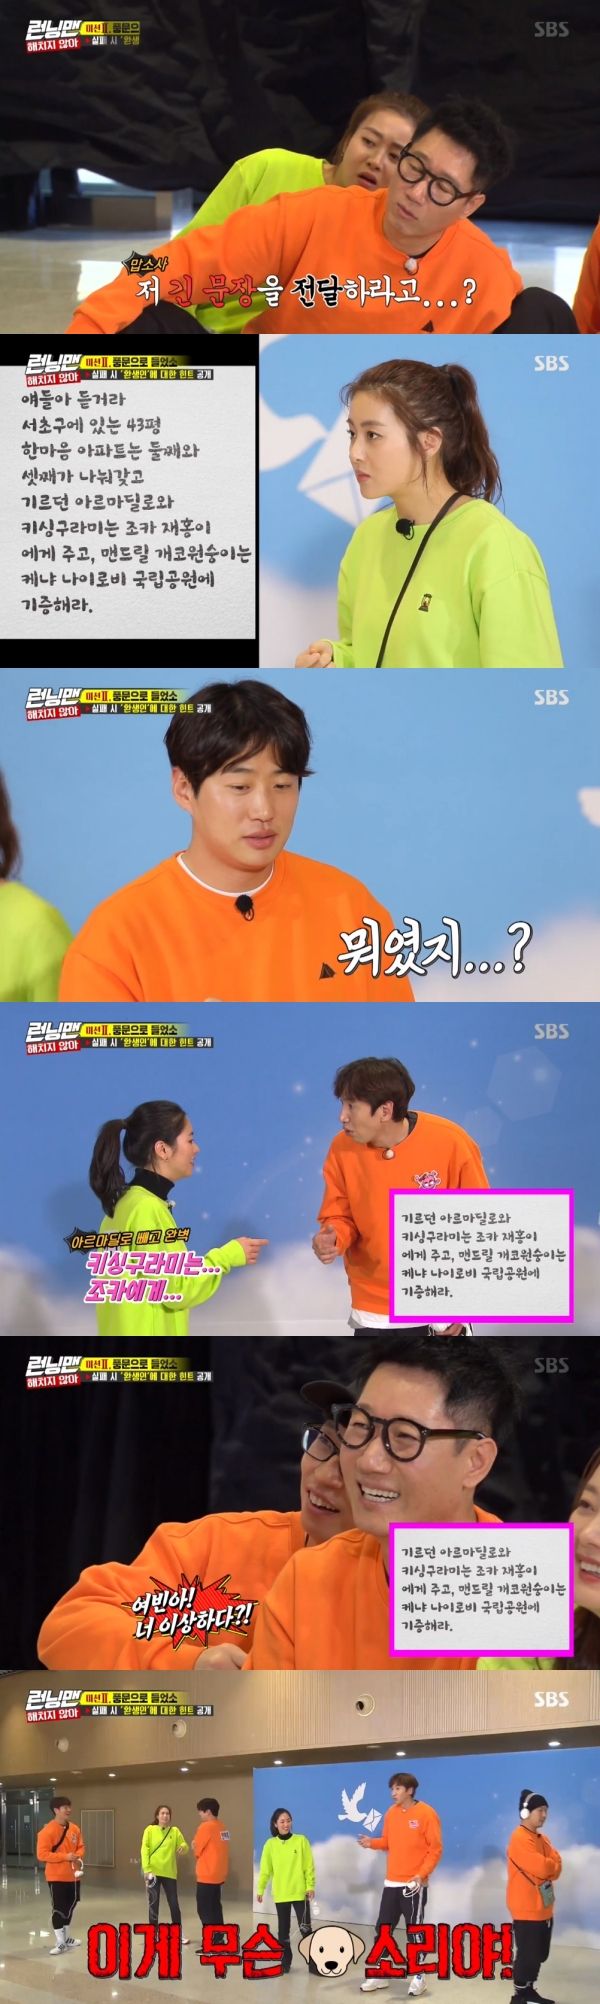 Jeon Yeo-been laughed in the wrong answer.On SBS Running Man broadcasted on the 12th, Actor Kang So-ra, Kim Sung-oh, Ahn Jae-hong and Jeon Yeo-been participated as guests on I do not hurt Race.On this day, four actors, who were about to release the movie I do not hurt, teamed up and competed with the Running Man team.Kang So-ra, during the race, laughed at the I heard it through the wind mission, saying, I can not even remember my name. I can not do this.Kang So-ra delivered a fingerprint to Ahn Jae-hong, describing it as a will; however, he misrepresented Gagko Monkey as an elephant and laughed at the members.Ahn Jae-hong then delivered to Jeon Yeo-been as a knockhorn, while Kang So-ra was furious.Jeon Yeo-been groped and delivered a different content, while Yoo Jae-Suk smiled, saying, Youre weird, girl.The opposing team Yoo Jae-Suk watched the bait, and Jeon Yeo-been delivered it to Lee Kwang-soo.Lee Kwang-soo laughed at the members, saying, What is this?The last messenger Haha said, Armandy, is not that champagne name? He answered Give me a cat called Armandy and a kissingurami to a rhino. He eventually failed the mission.Meanwhile, the penalties for Race were Kang So-ra and Lee Kwang-soo, Ji Suk-jin and Haha.